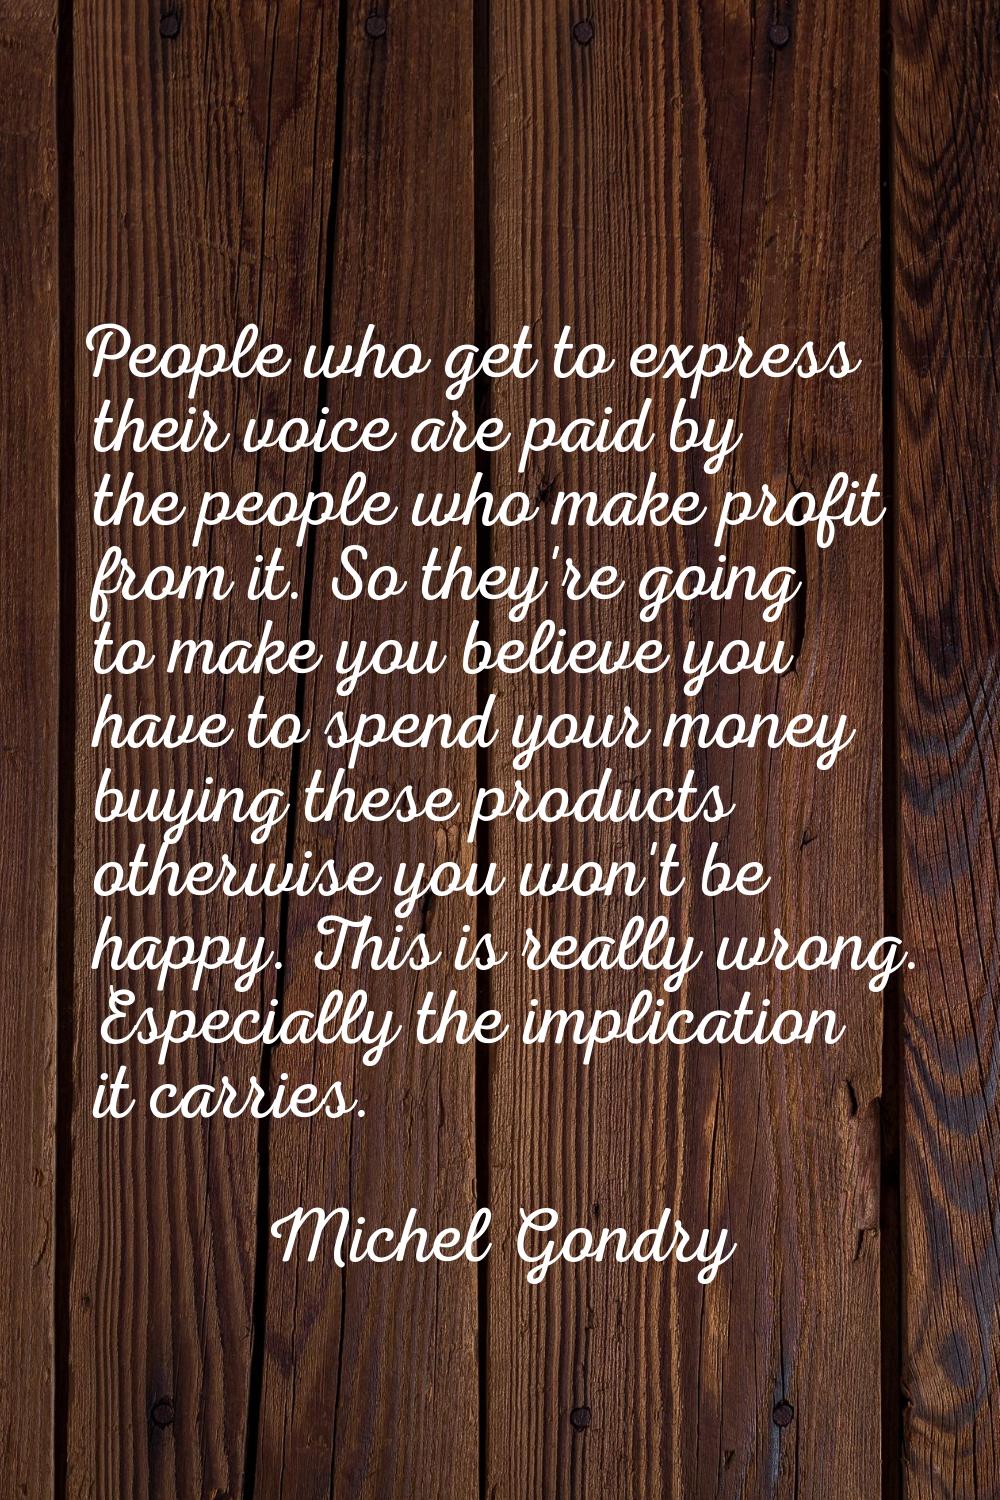 People who get to express their voice are paid by the people who make profit from it. So they're go